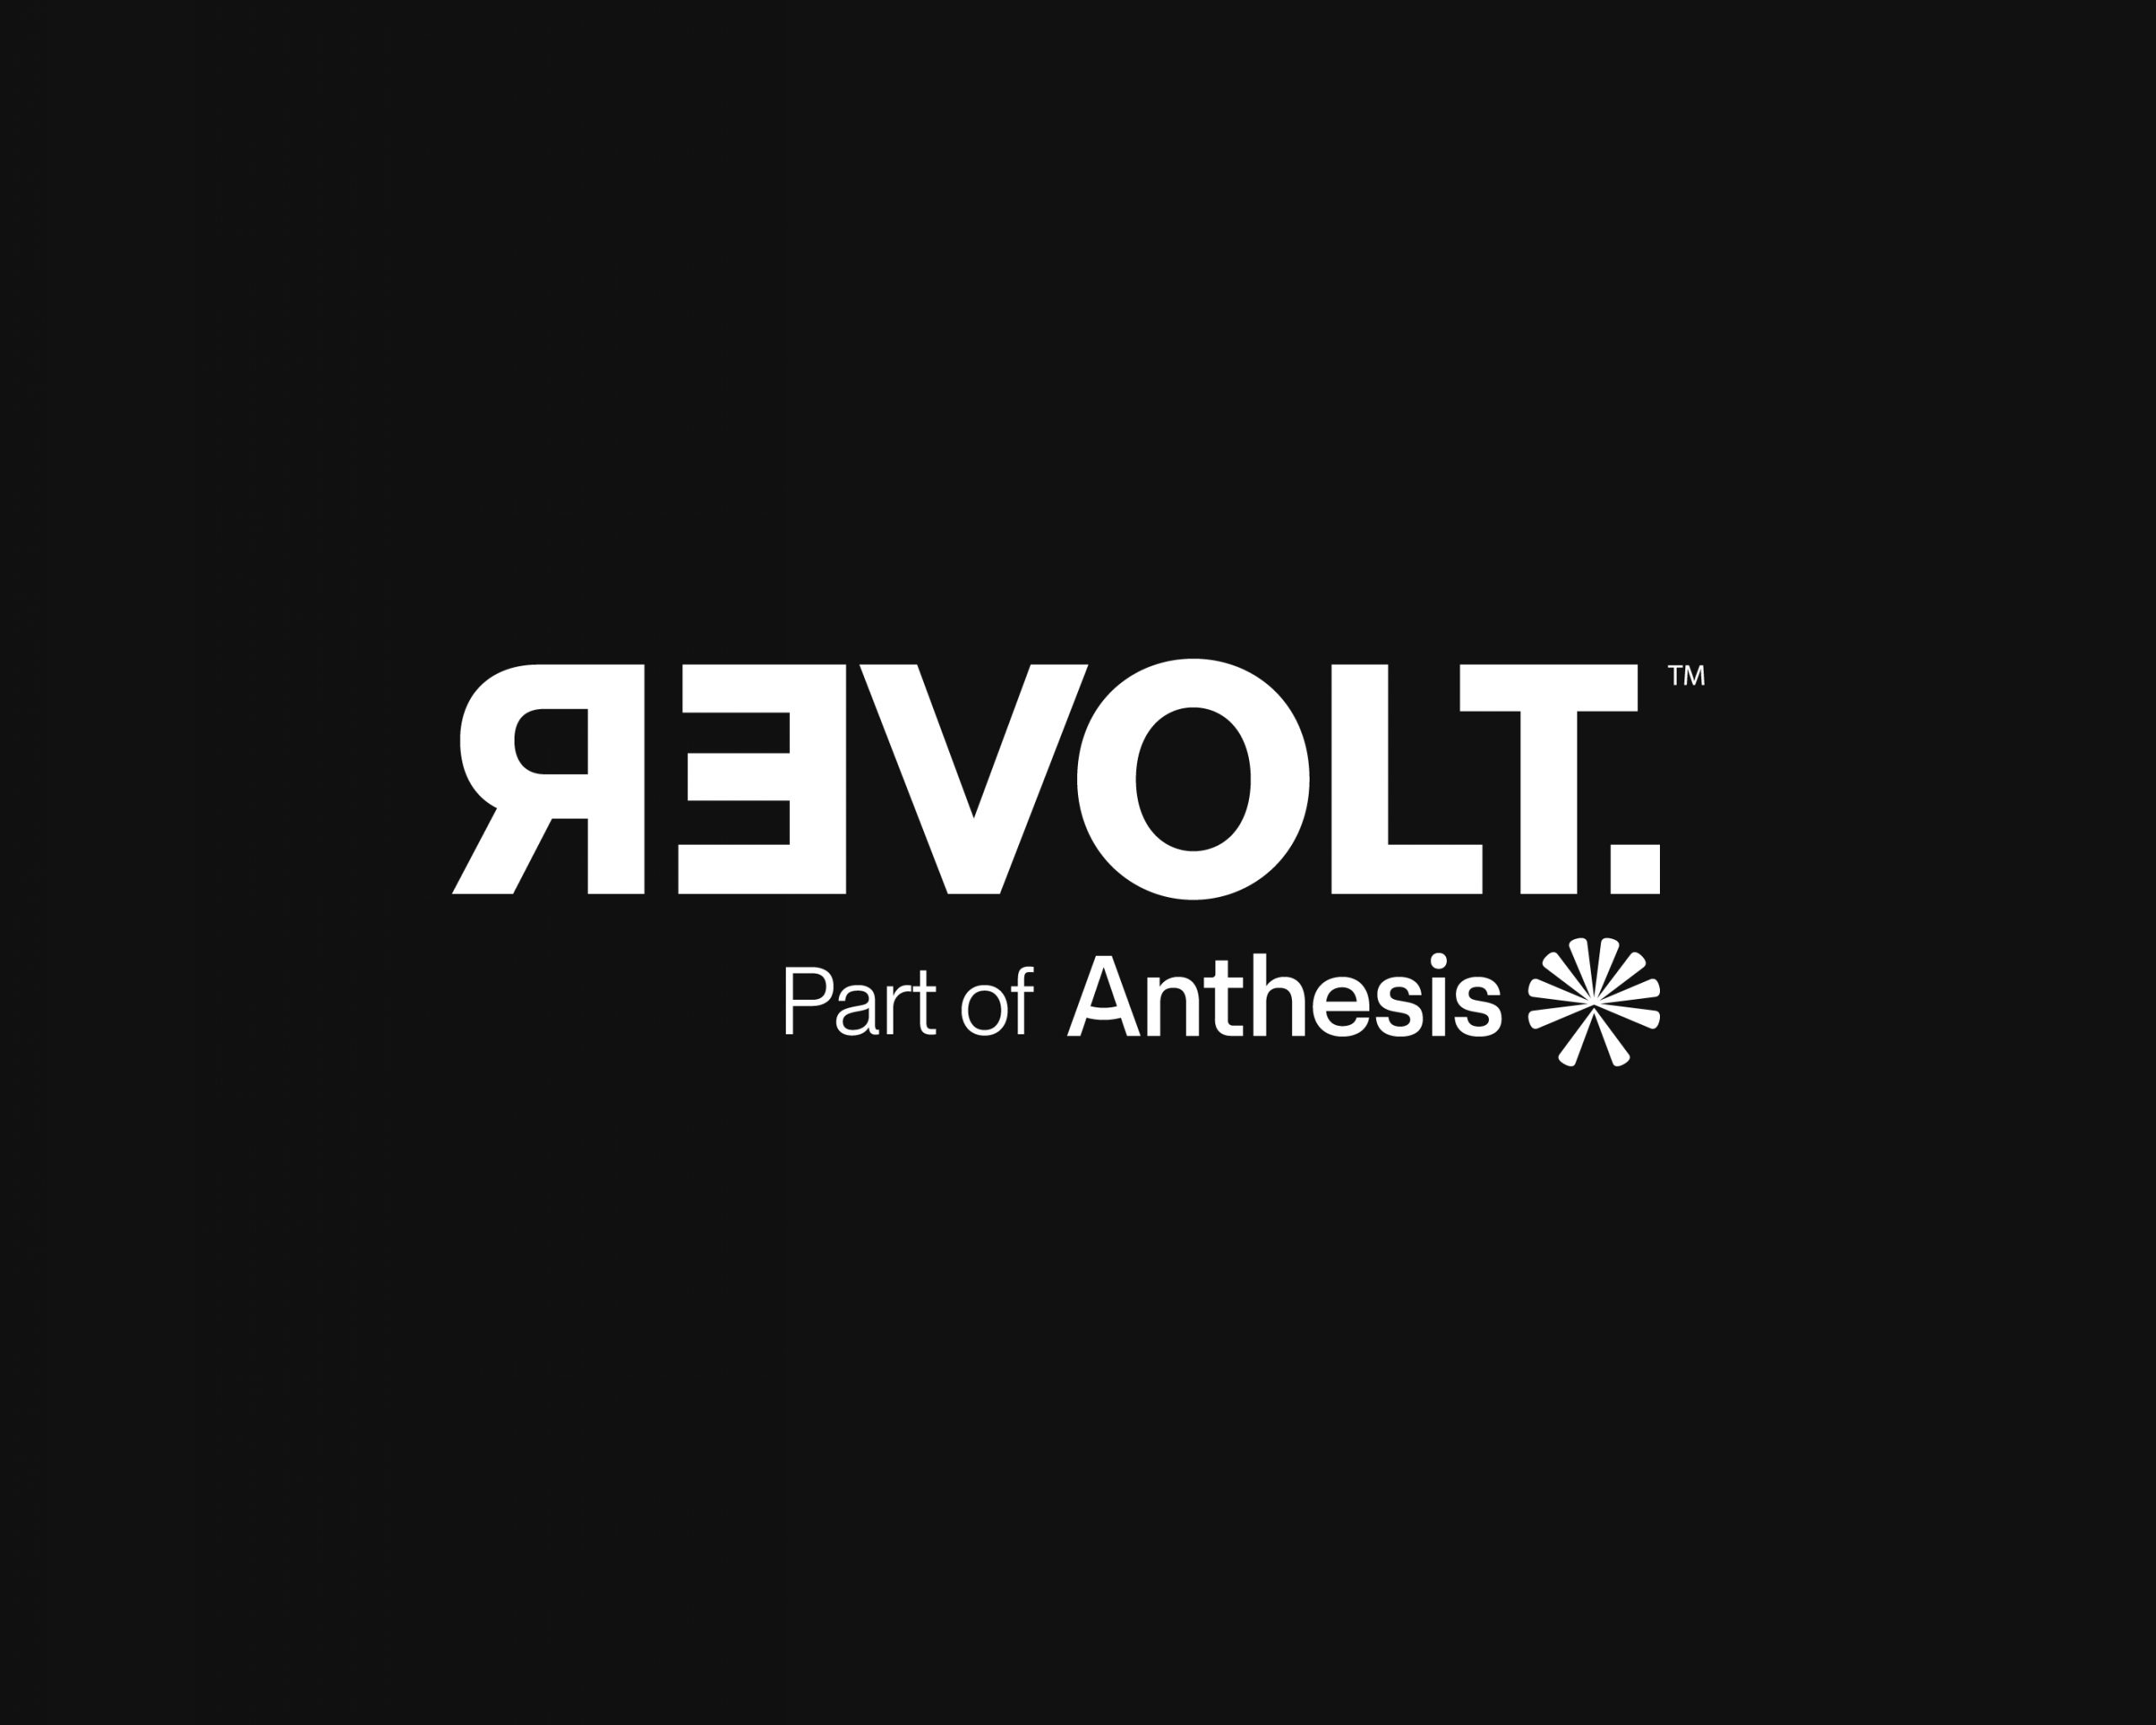 Revolt merges with Anthesis